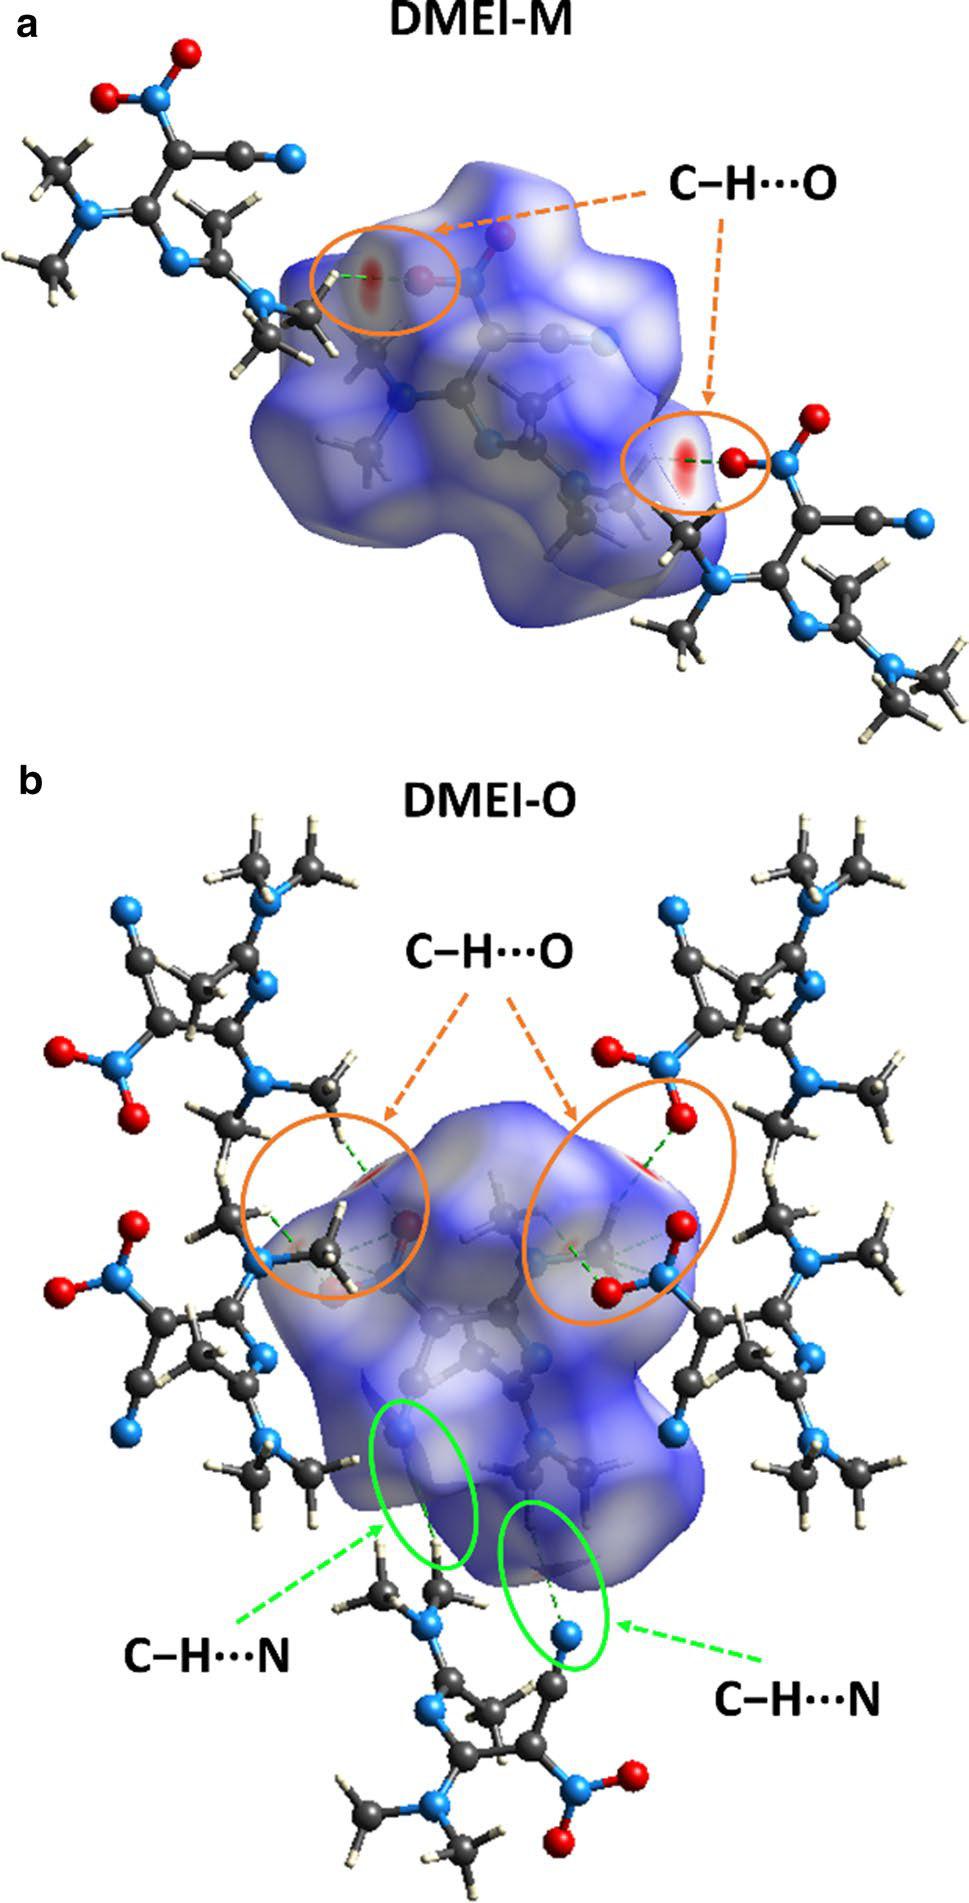 Figure 3a, b presents the d norm map of DMEI-M and DMEI- O, respectively, with interaction areas (red) located on the O-atom of Nitro and H-atom of dimethylamino groups.